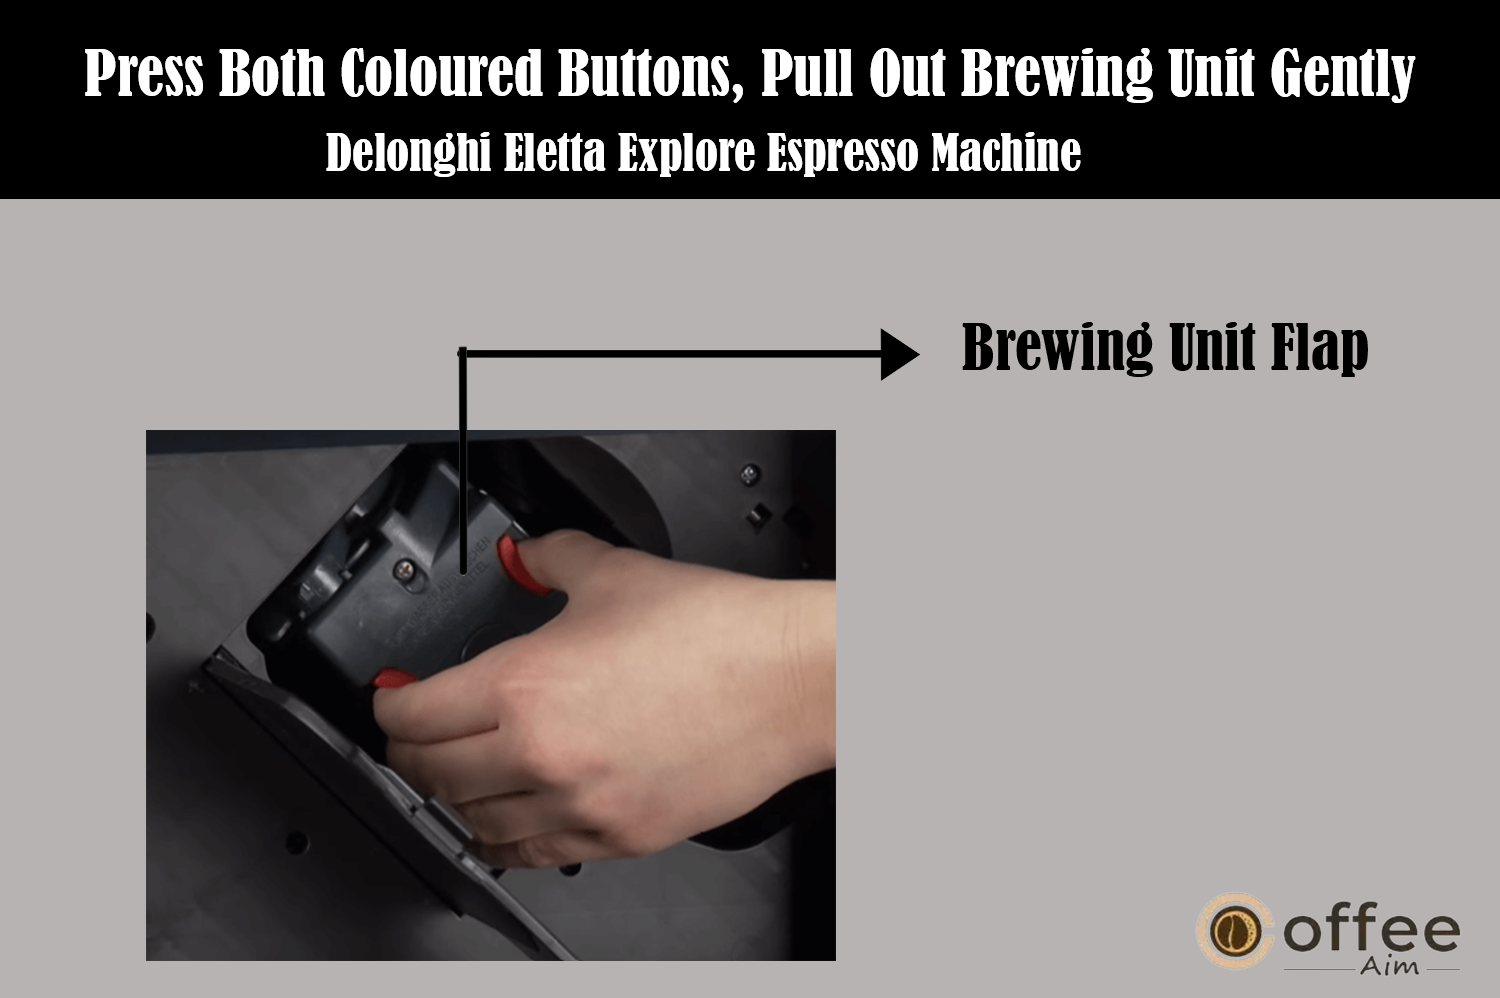 The image illustrates the process of simultaneously pressing both colored buttons and gently pulling out the brewing unit from the "Delonghi Eletta Explore Espresso Machine," as detailed in the article "How to Use the Delonghi Eletta Explore Espresso Machine."